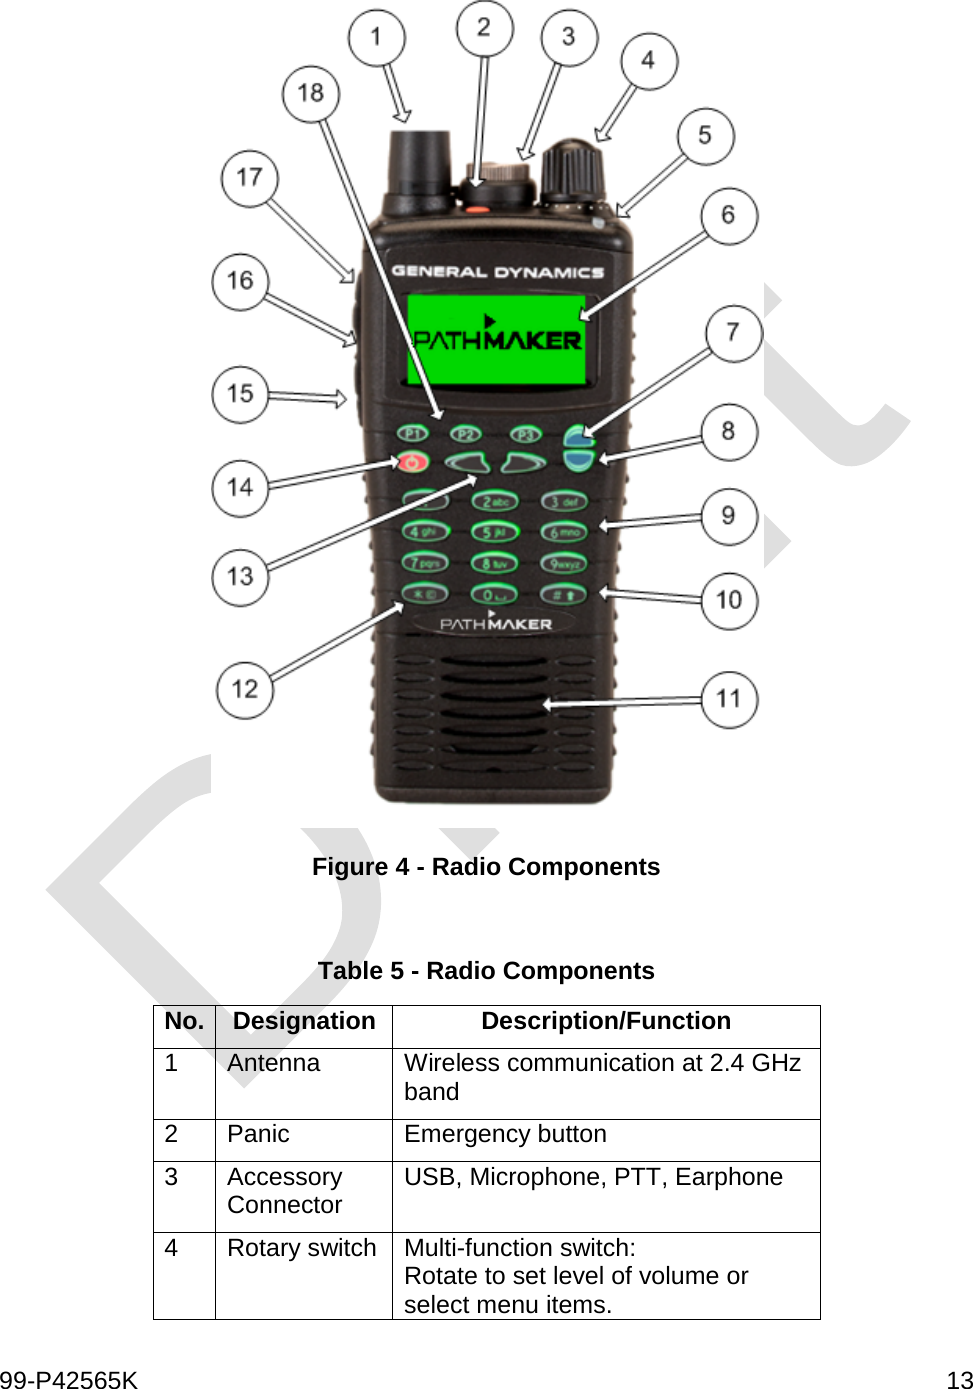  99-P42565K     13   Figure 4 - Radio Components  Table 5 - Radio Components No. Designation Description/Function 1 Antenna Wireless communication at 2.4 GHz band 2 Panic Emergency button 3 Accessory Connector  USB, Microphone, PTT, Earphone 4 Rotary switch Multi-function switch: Rotate to set level of volume or select menu items. 